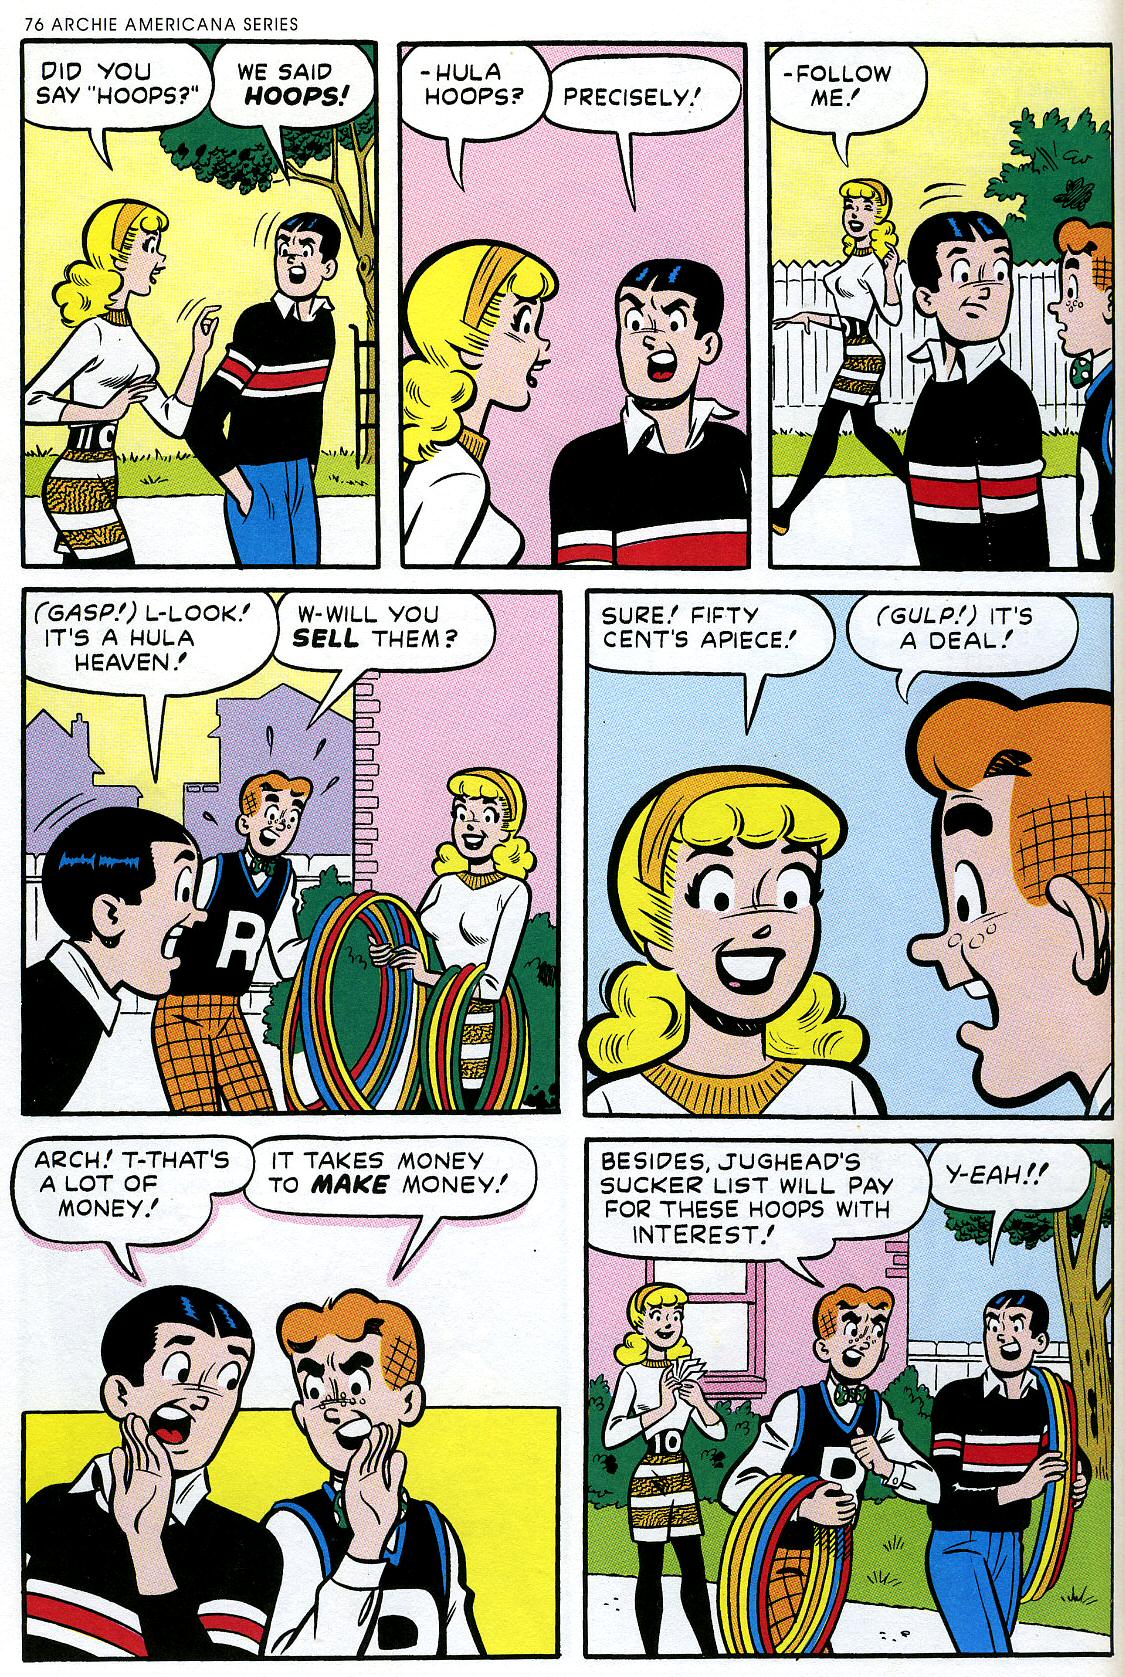 Read online Archie Americana Series comic -  Issue # TPB 2 - 78